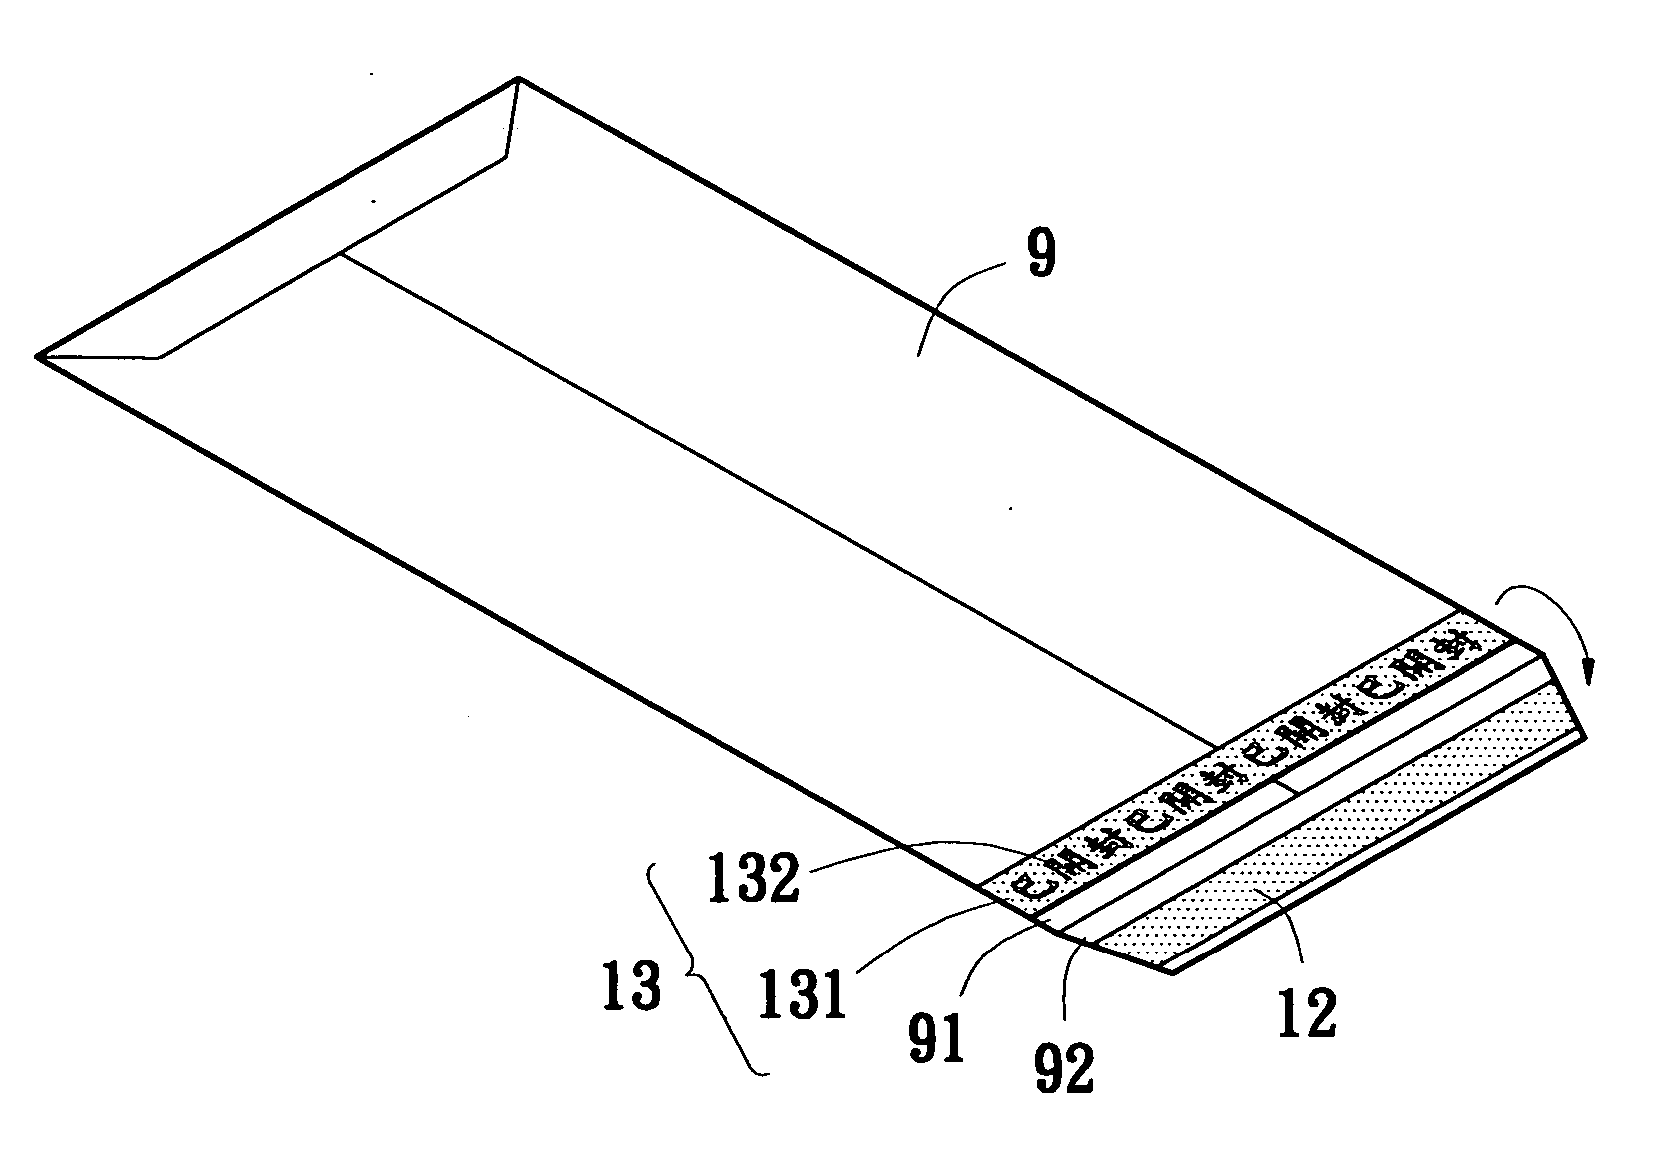 Adhesive tape structure for sealing and keeping secrecy